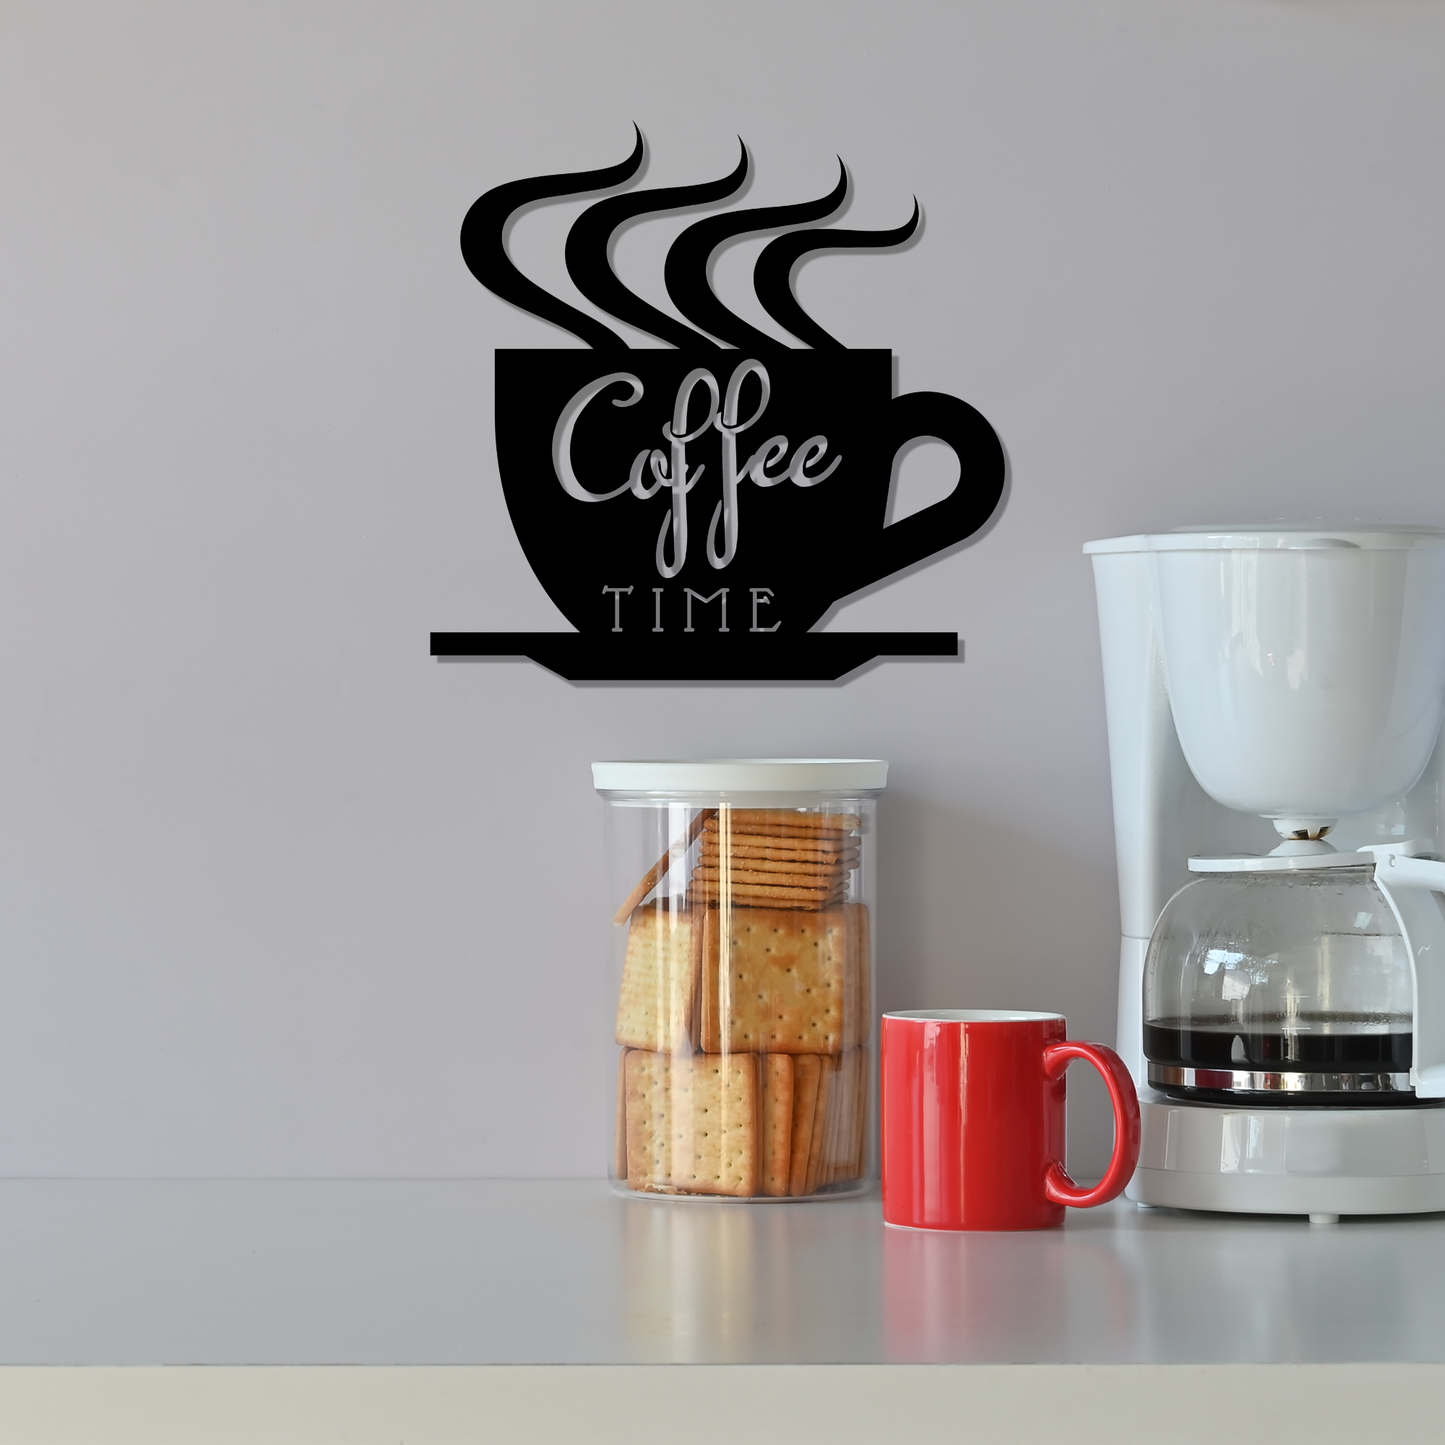 Coffee Time Metal Wall Art, Cafe Sign, Coffee Lover Gift Idea, Kitchen Hanging Wall Art, KingWood Clock Decor, Home Barista Enthusiast Gift